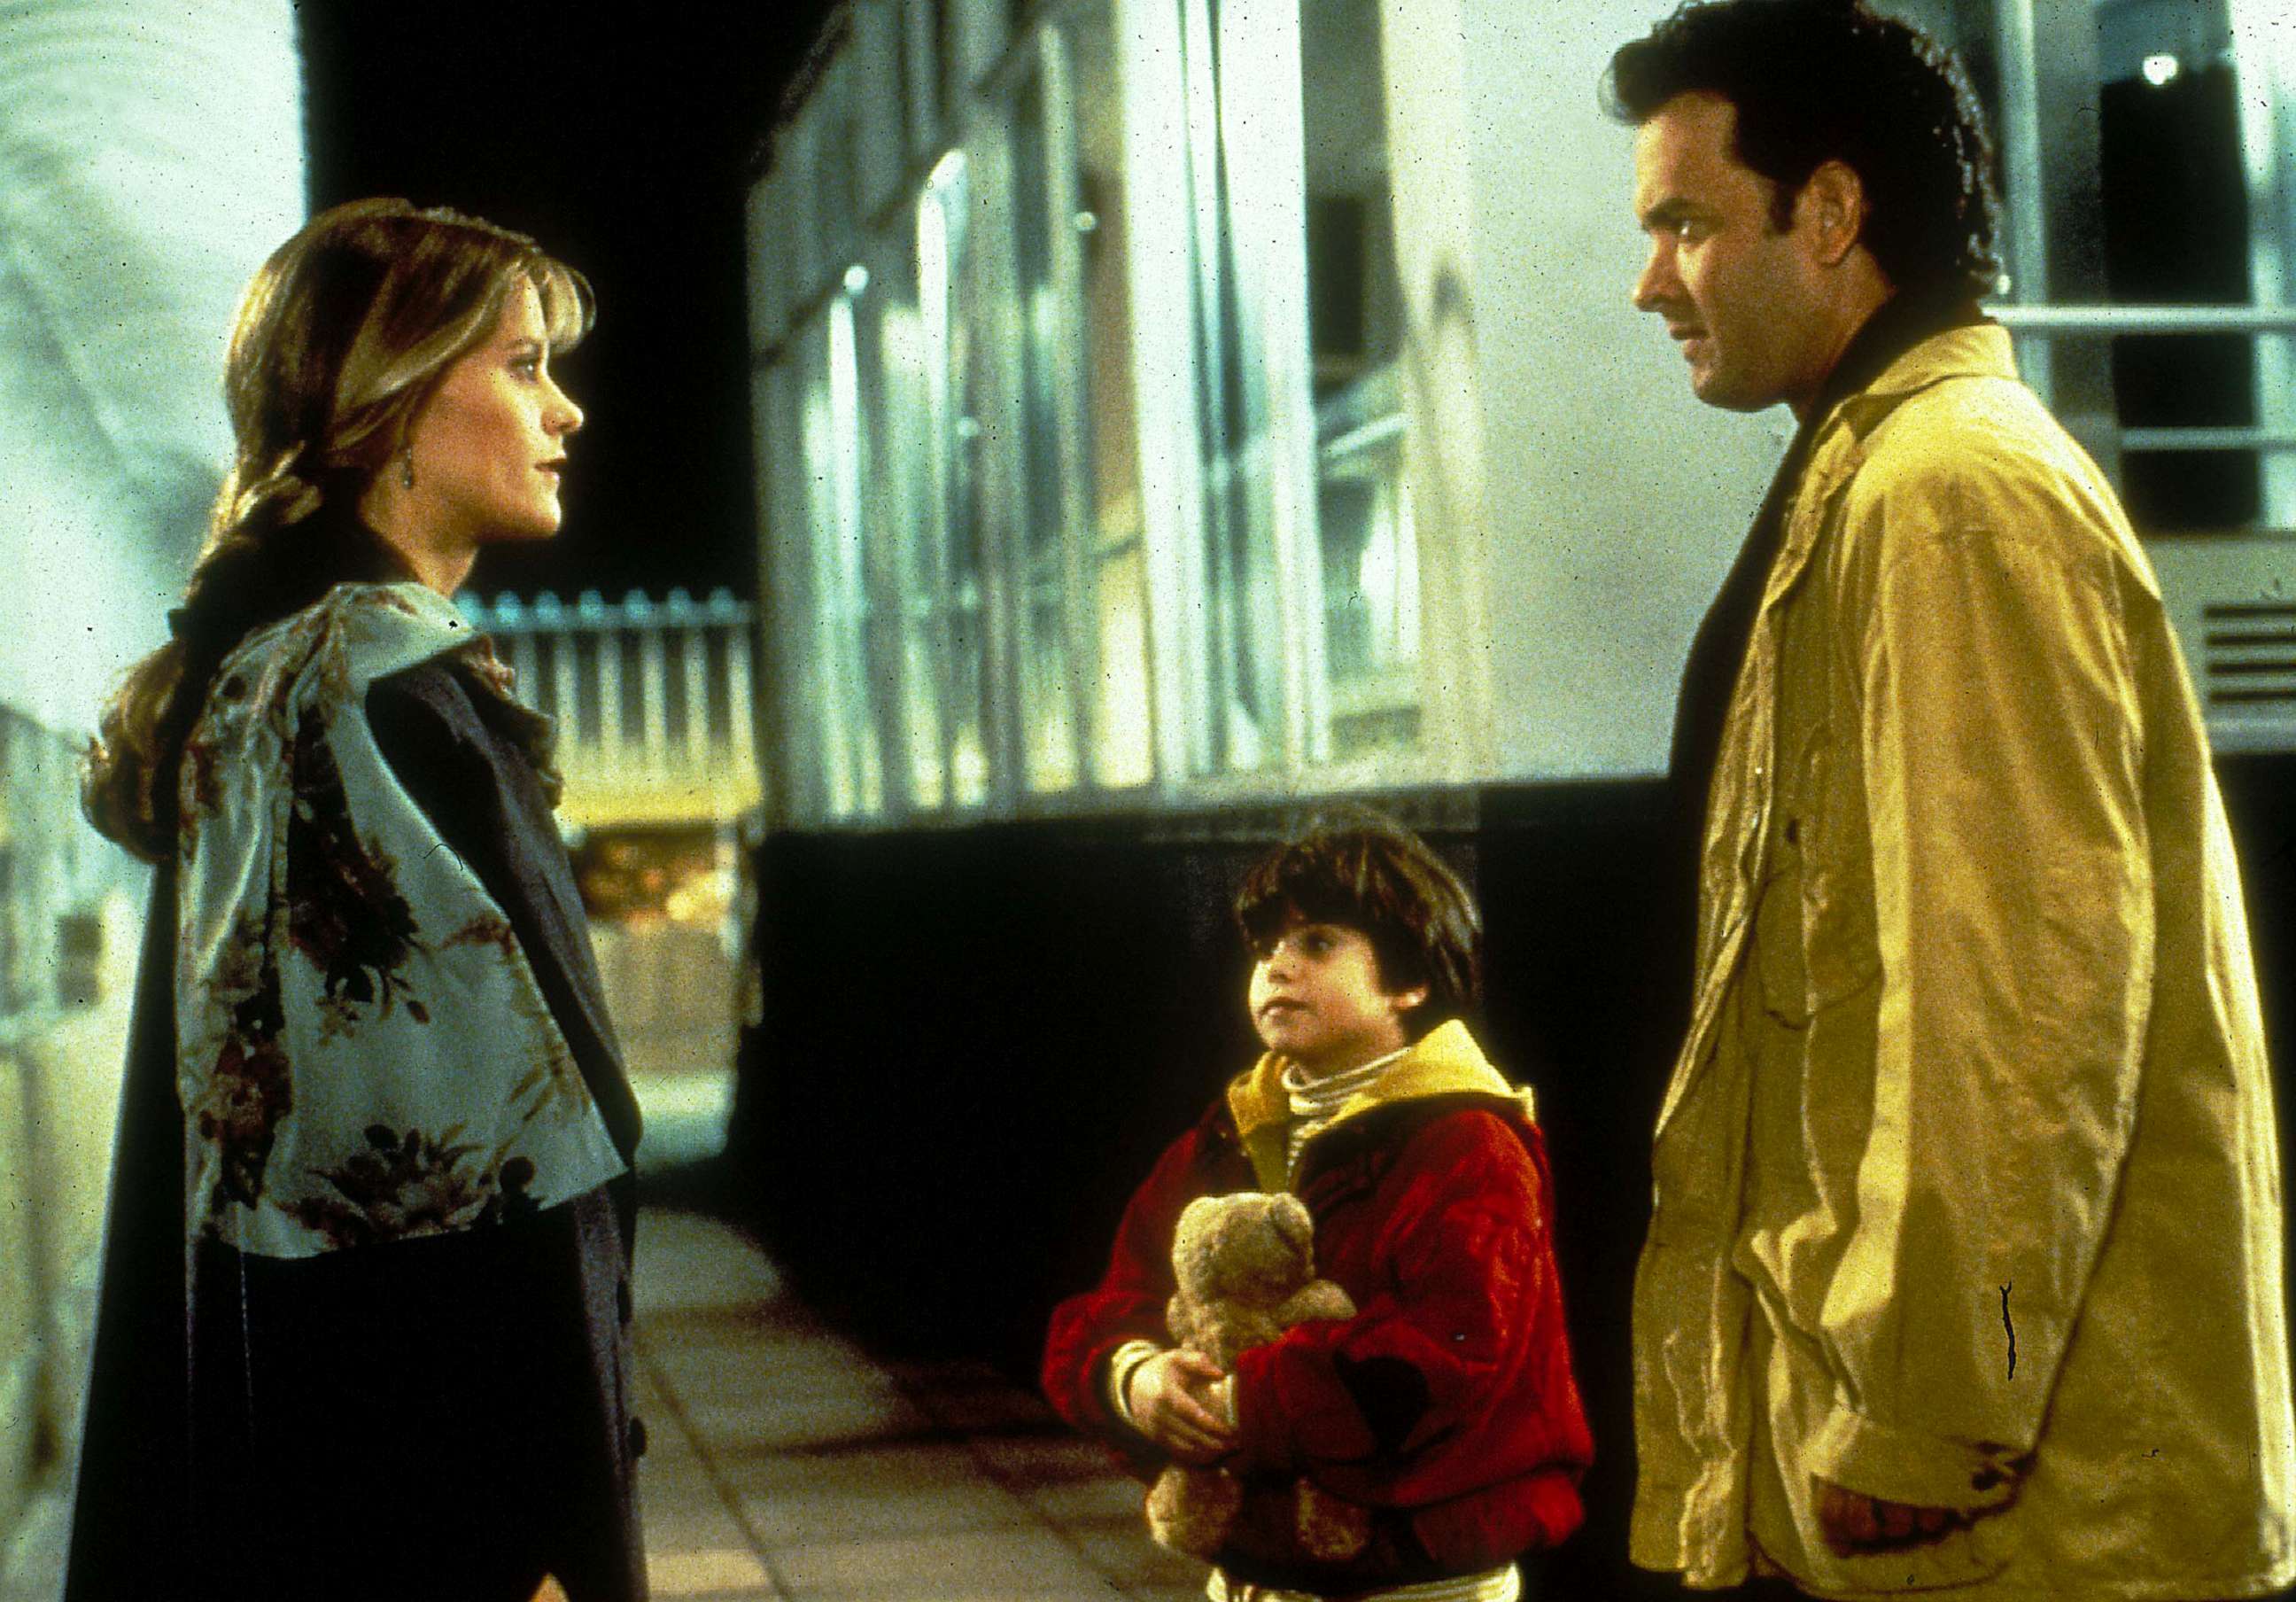 PHOTO: Meg Ryan, as Annie Reed, and Tom Hanks, as Sam Baldwin, in a scene from "Sleepless in Seattle."